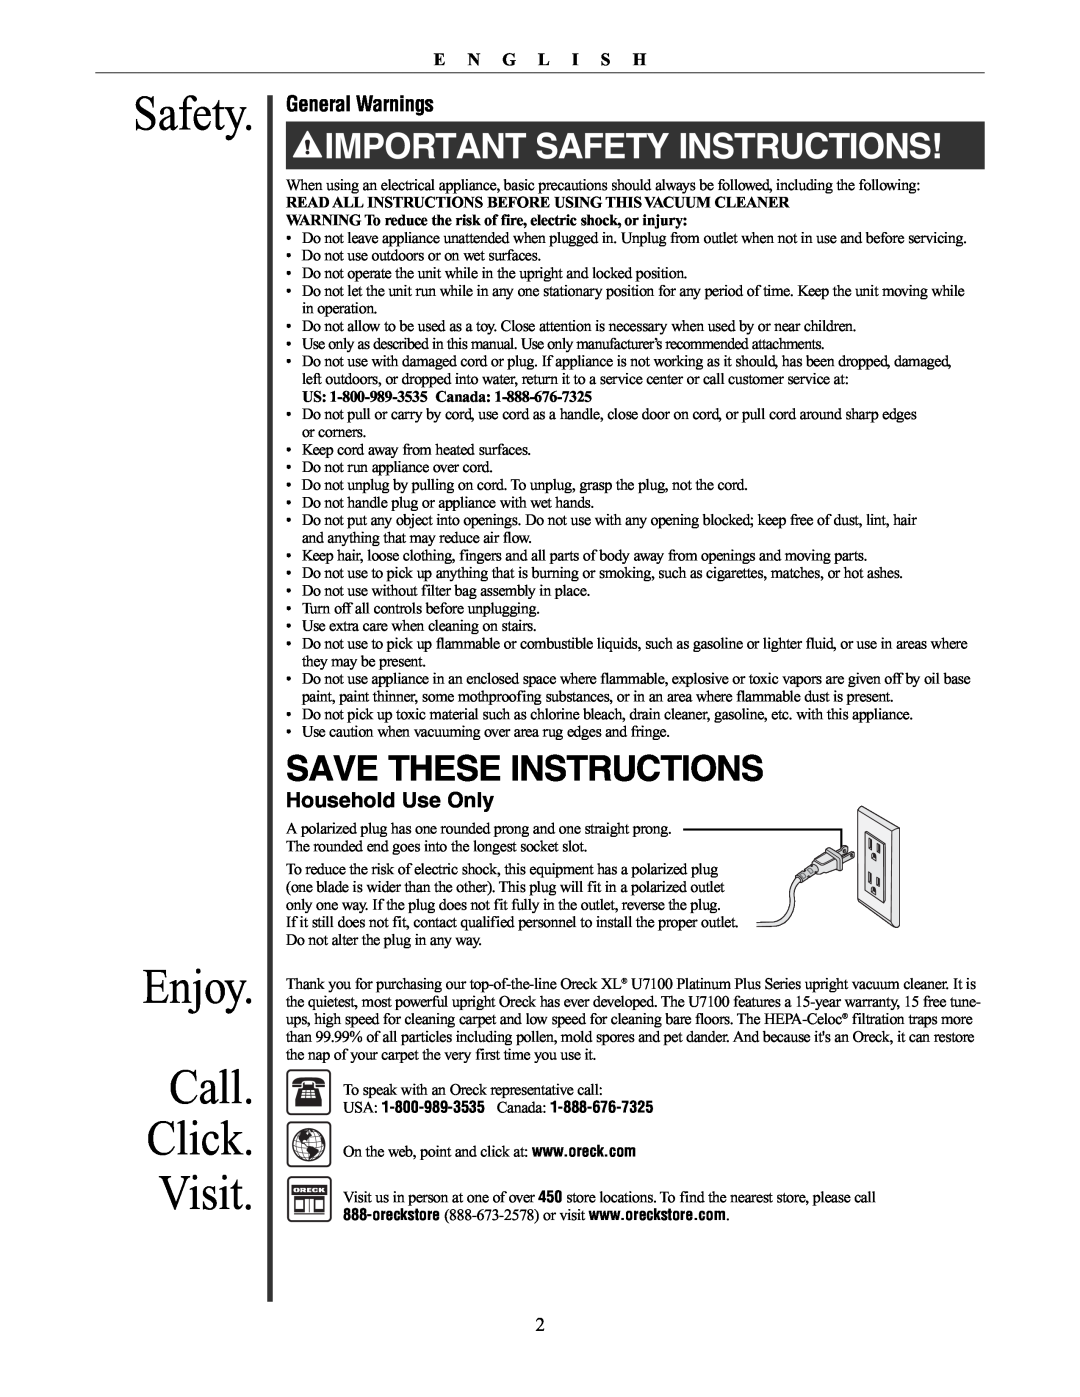 Oreck 79030-01REVA manual Safety Enjoy Call Click Visit, Save These Instructions, General Warnings, Household Use Only 